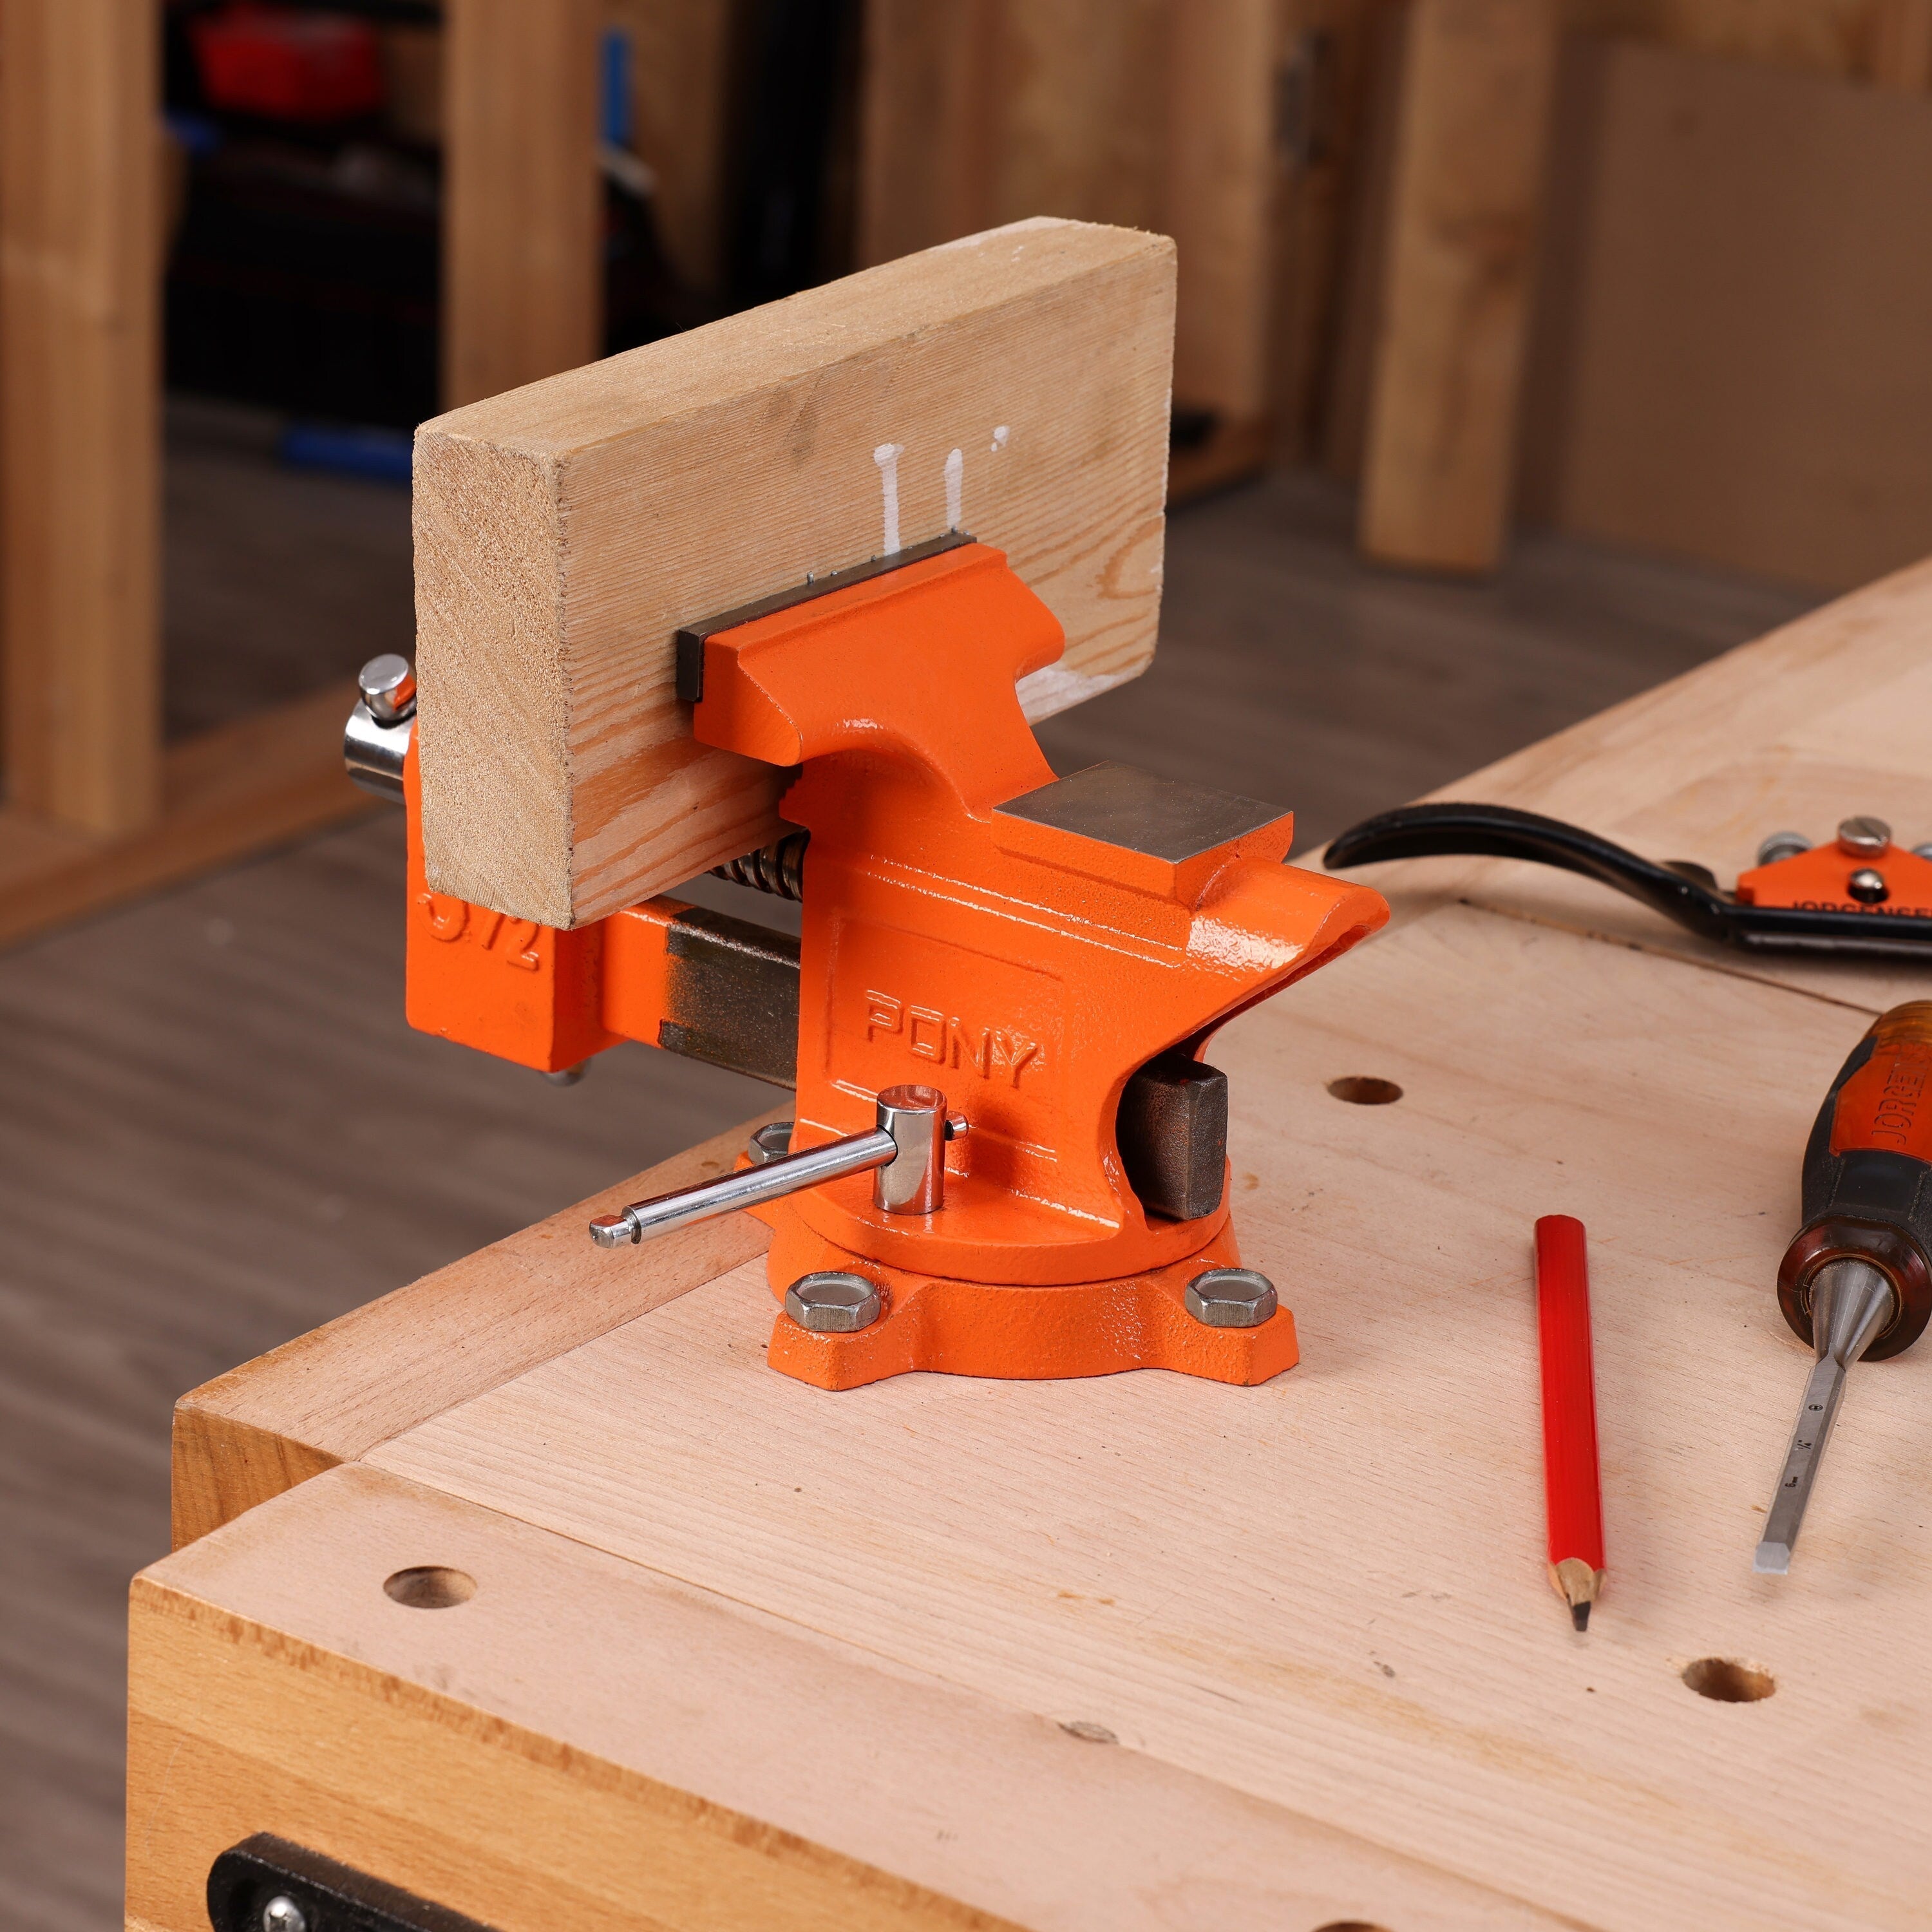 Pony light‑duty bench vise with swivel base AC23530 Power Tool Services